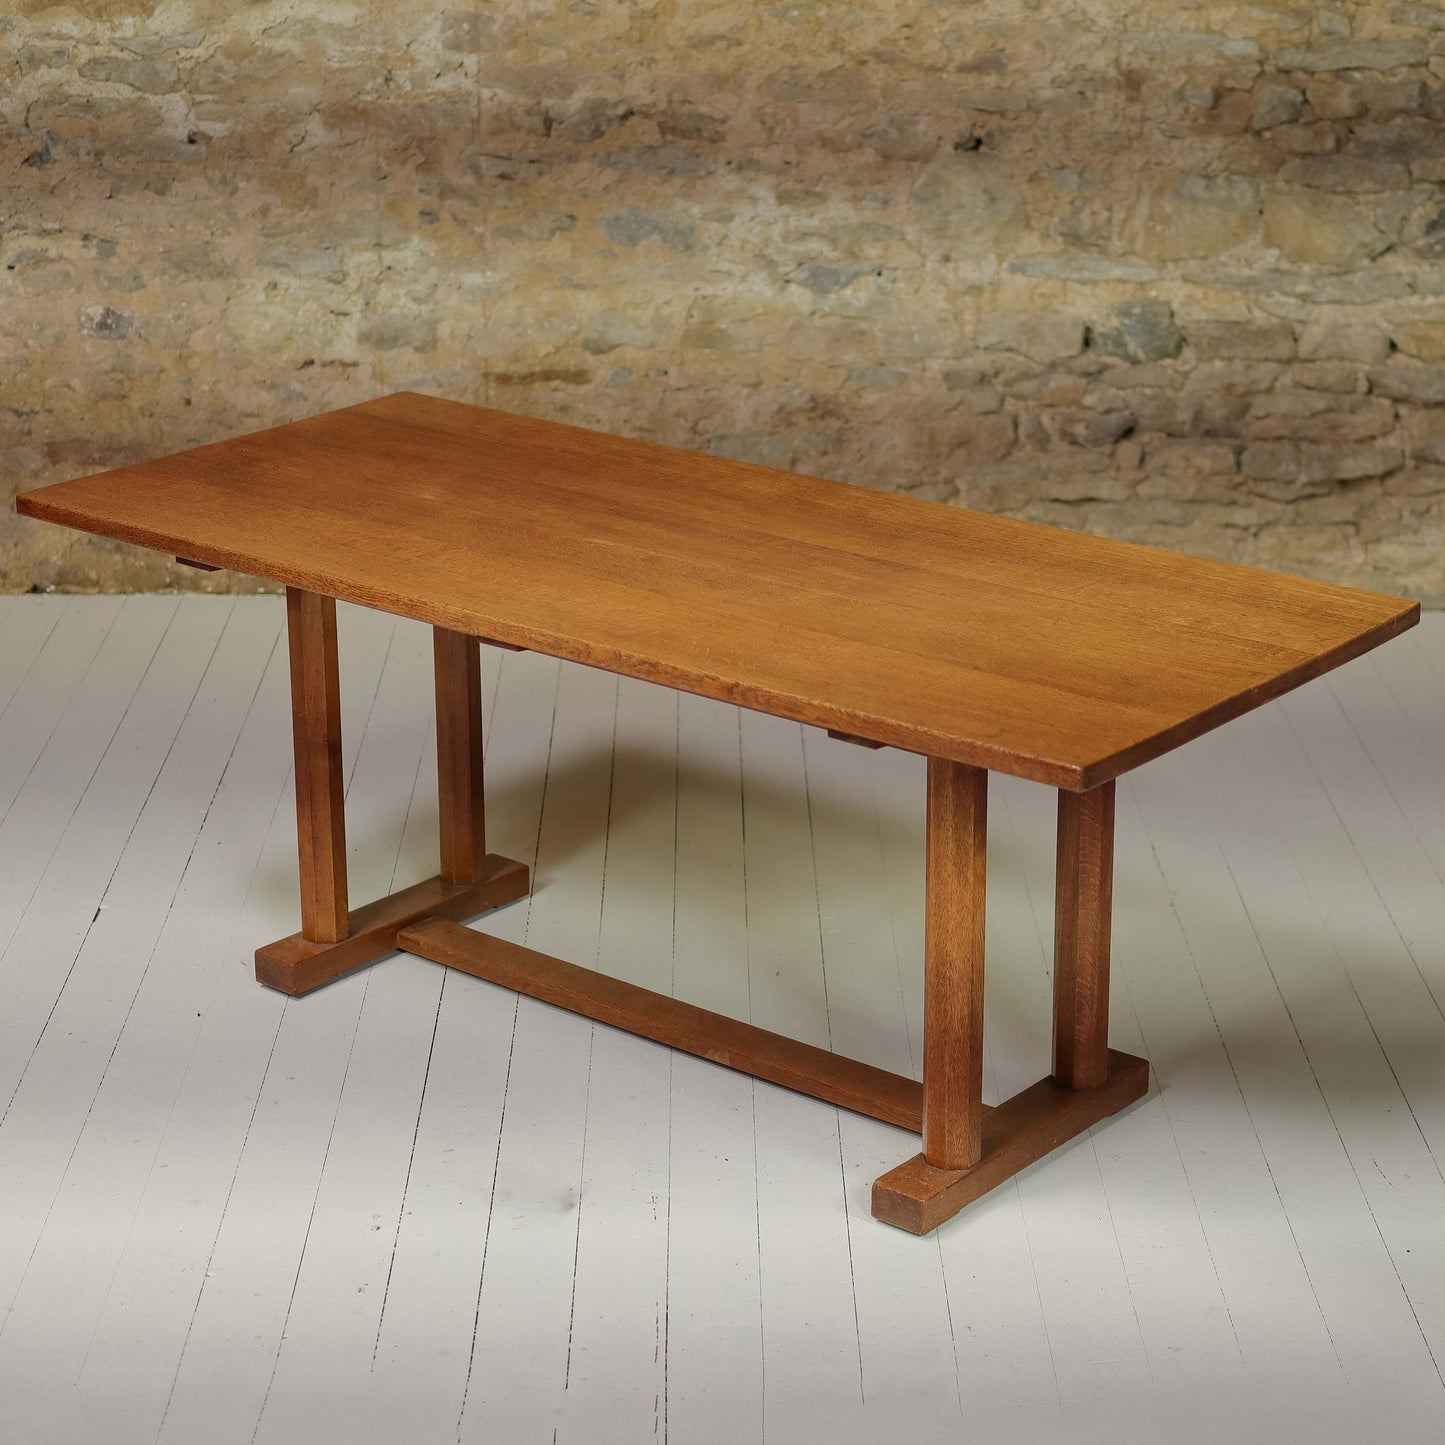 Gordon Russell Arts & Crafts Cotswold School English Oak Dining Table c. 1935